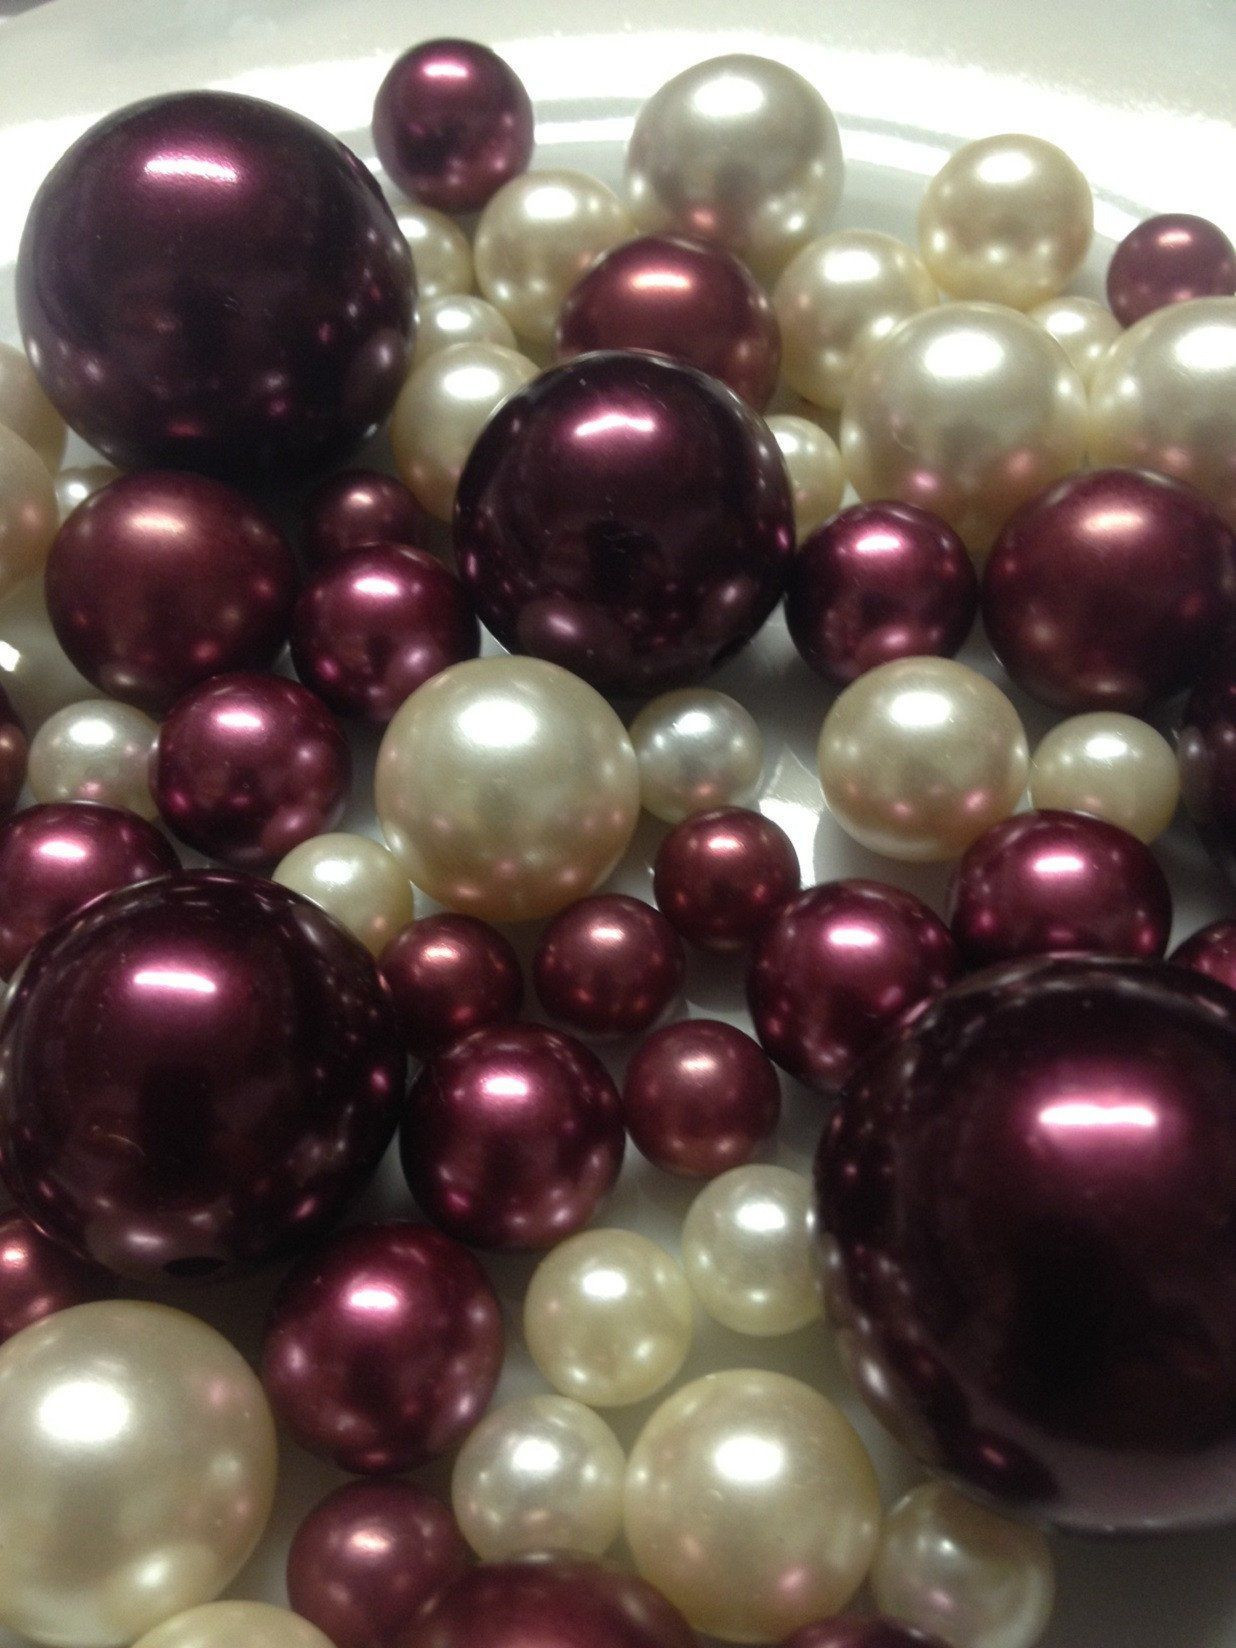 ivory pearl vase fillers of burgundy and ivory pearls vase filler pearls pearl table scatters for burgundy and ivory pearls vase filler pearls pearl table scatters diy floating pearl